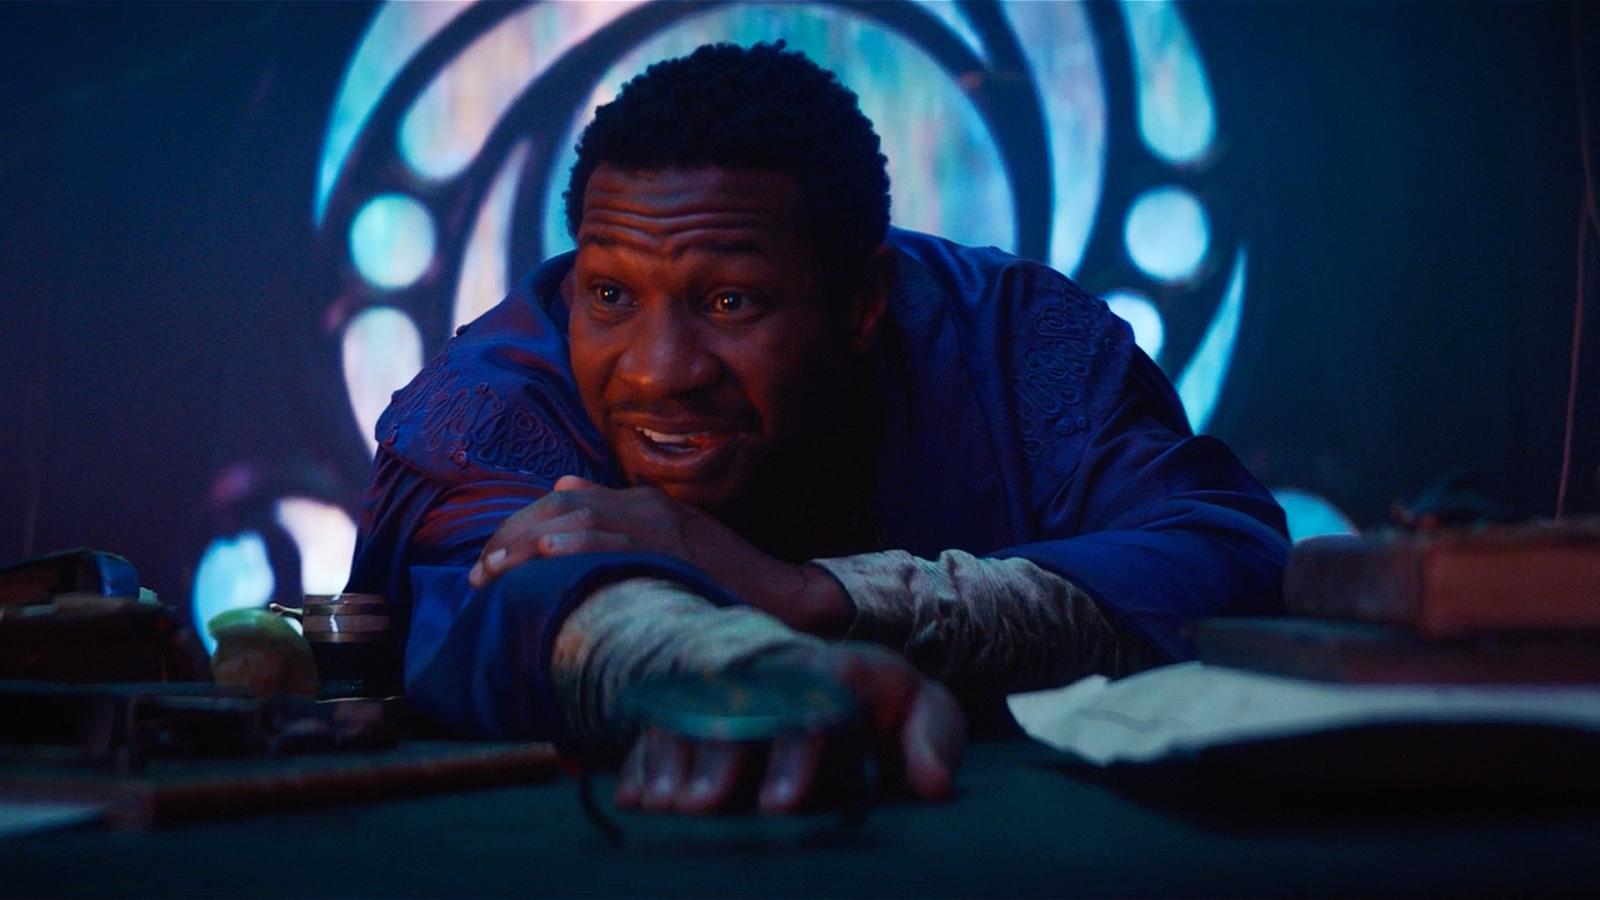 This Fan Theory Is the Perfect Tool to Save MCU Amid Jonathan Majors Scandal - image 2